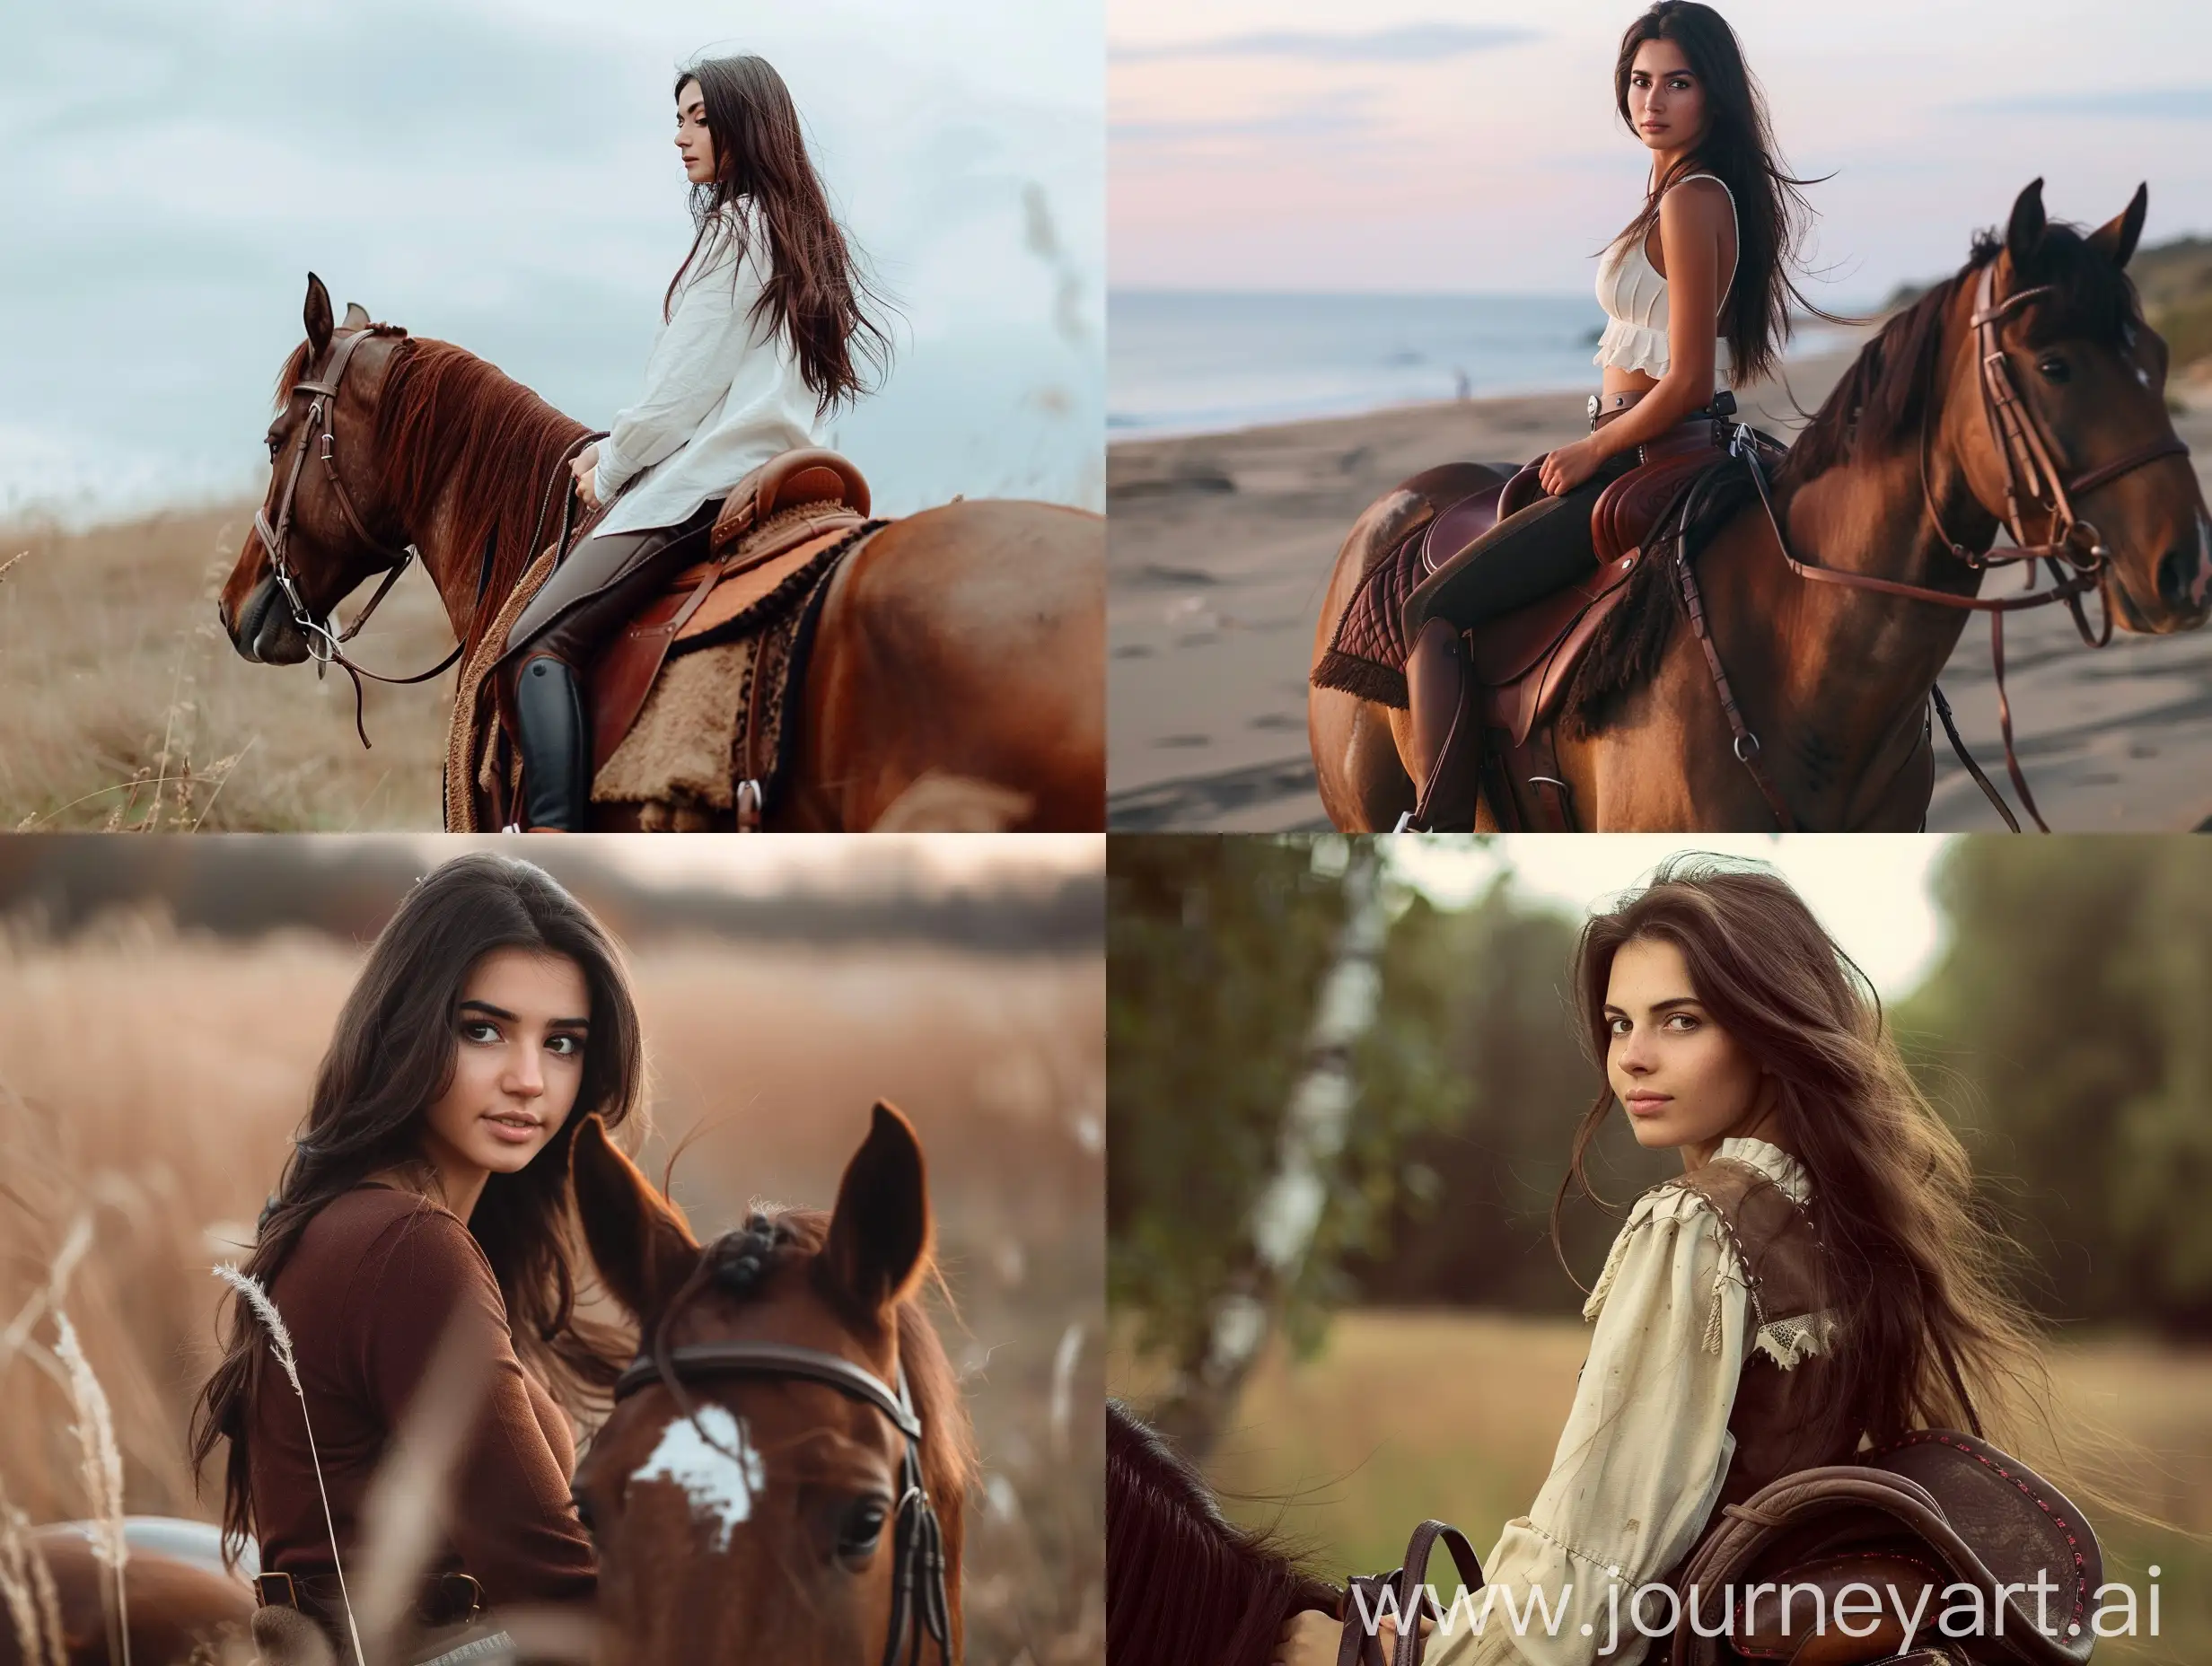 Elegant-Brunette-Riding-a-Majestic-Brown-Horse-Aesthetic-Equestrian-Photography